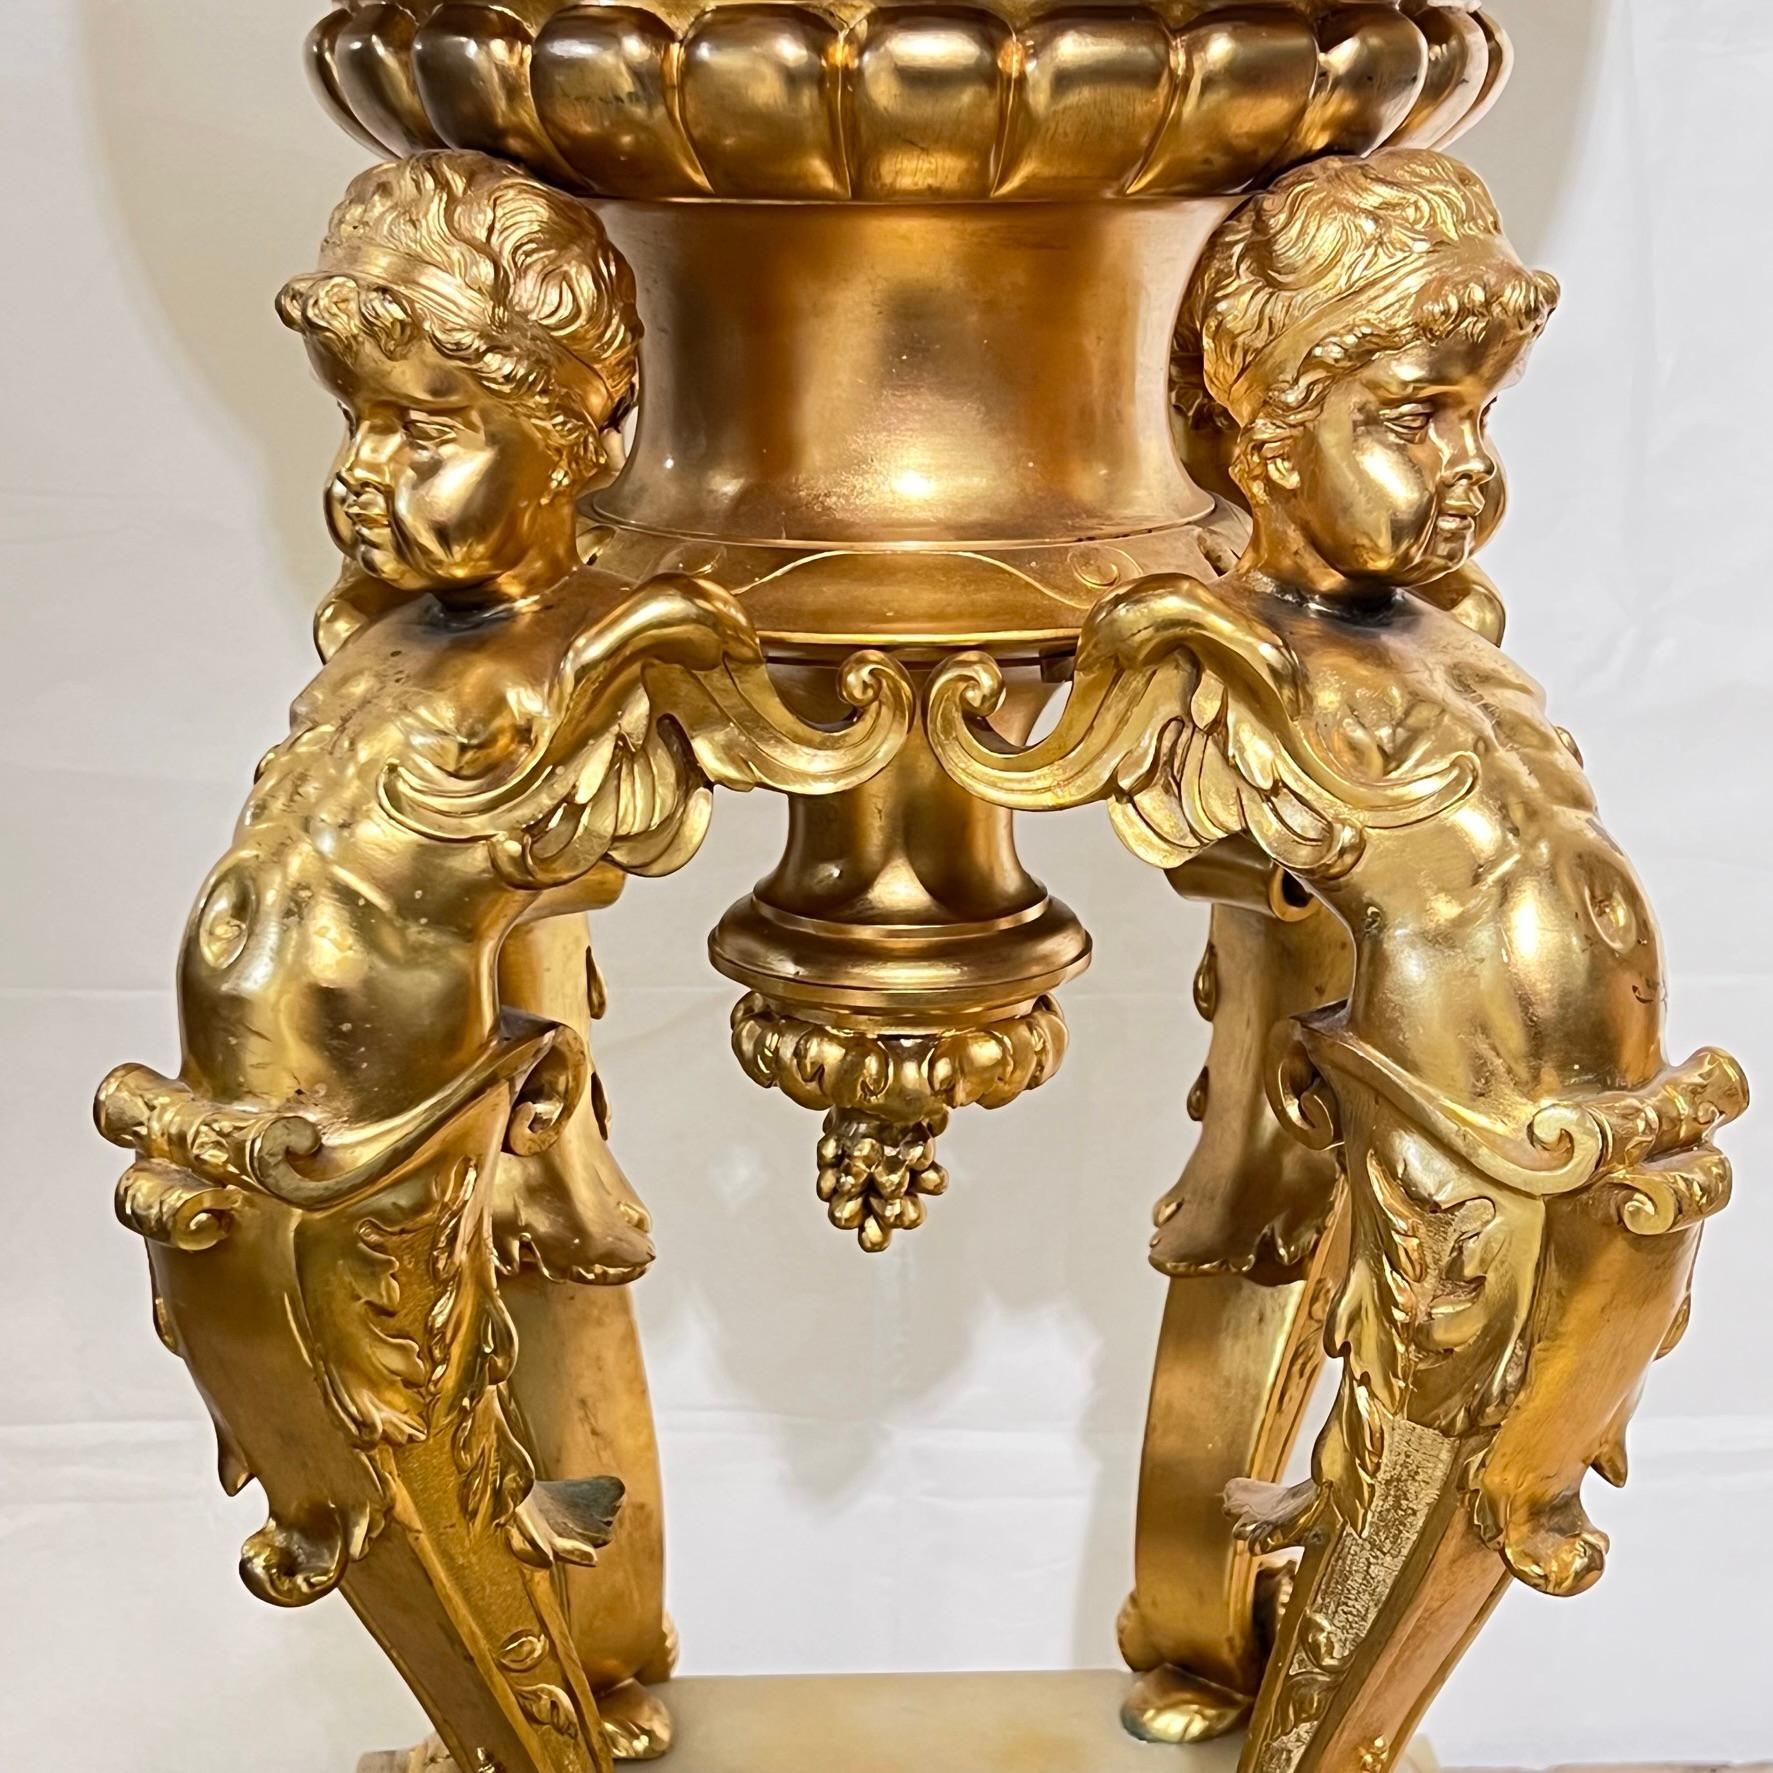 Monumental 19th Century French Neoclassical Onyx and Gilt Bronze Vase For Sale 9